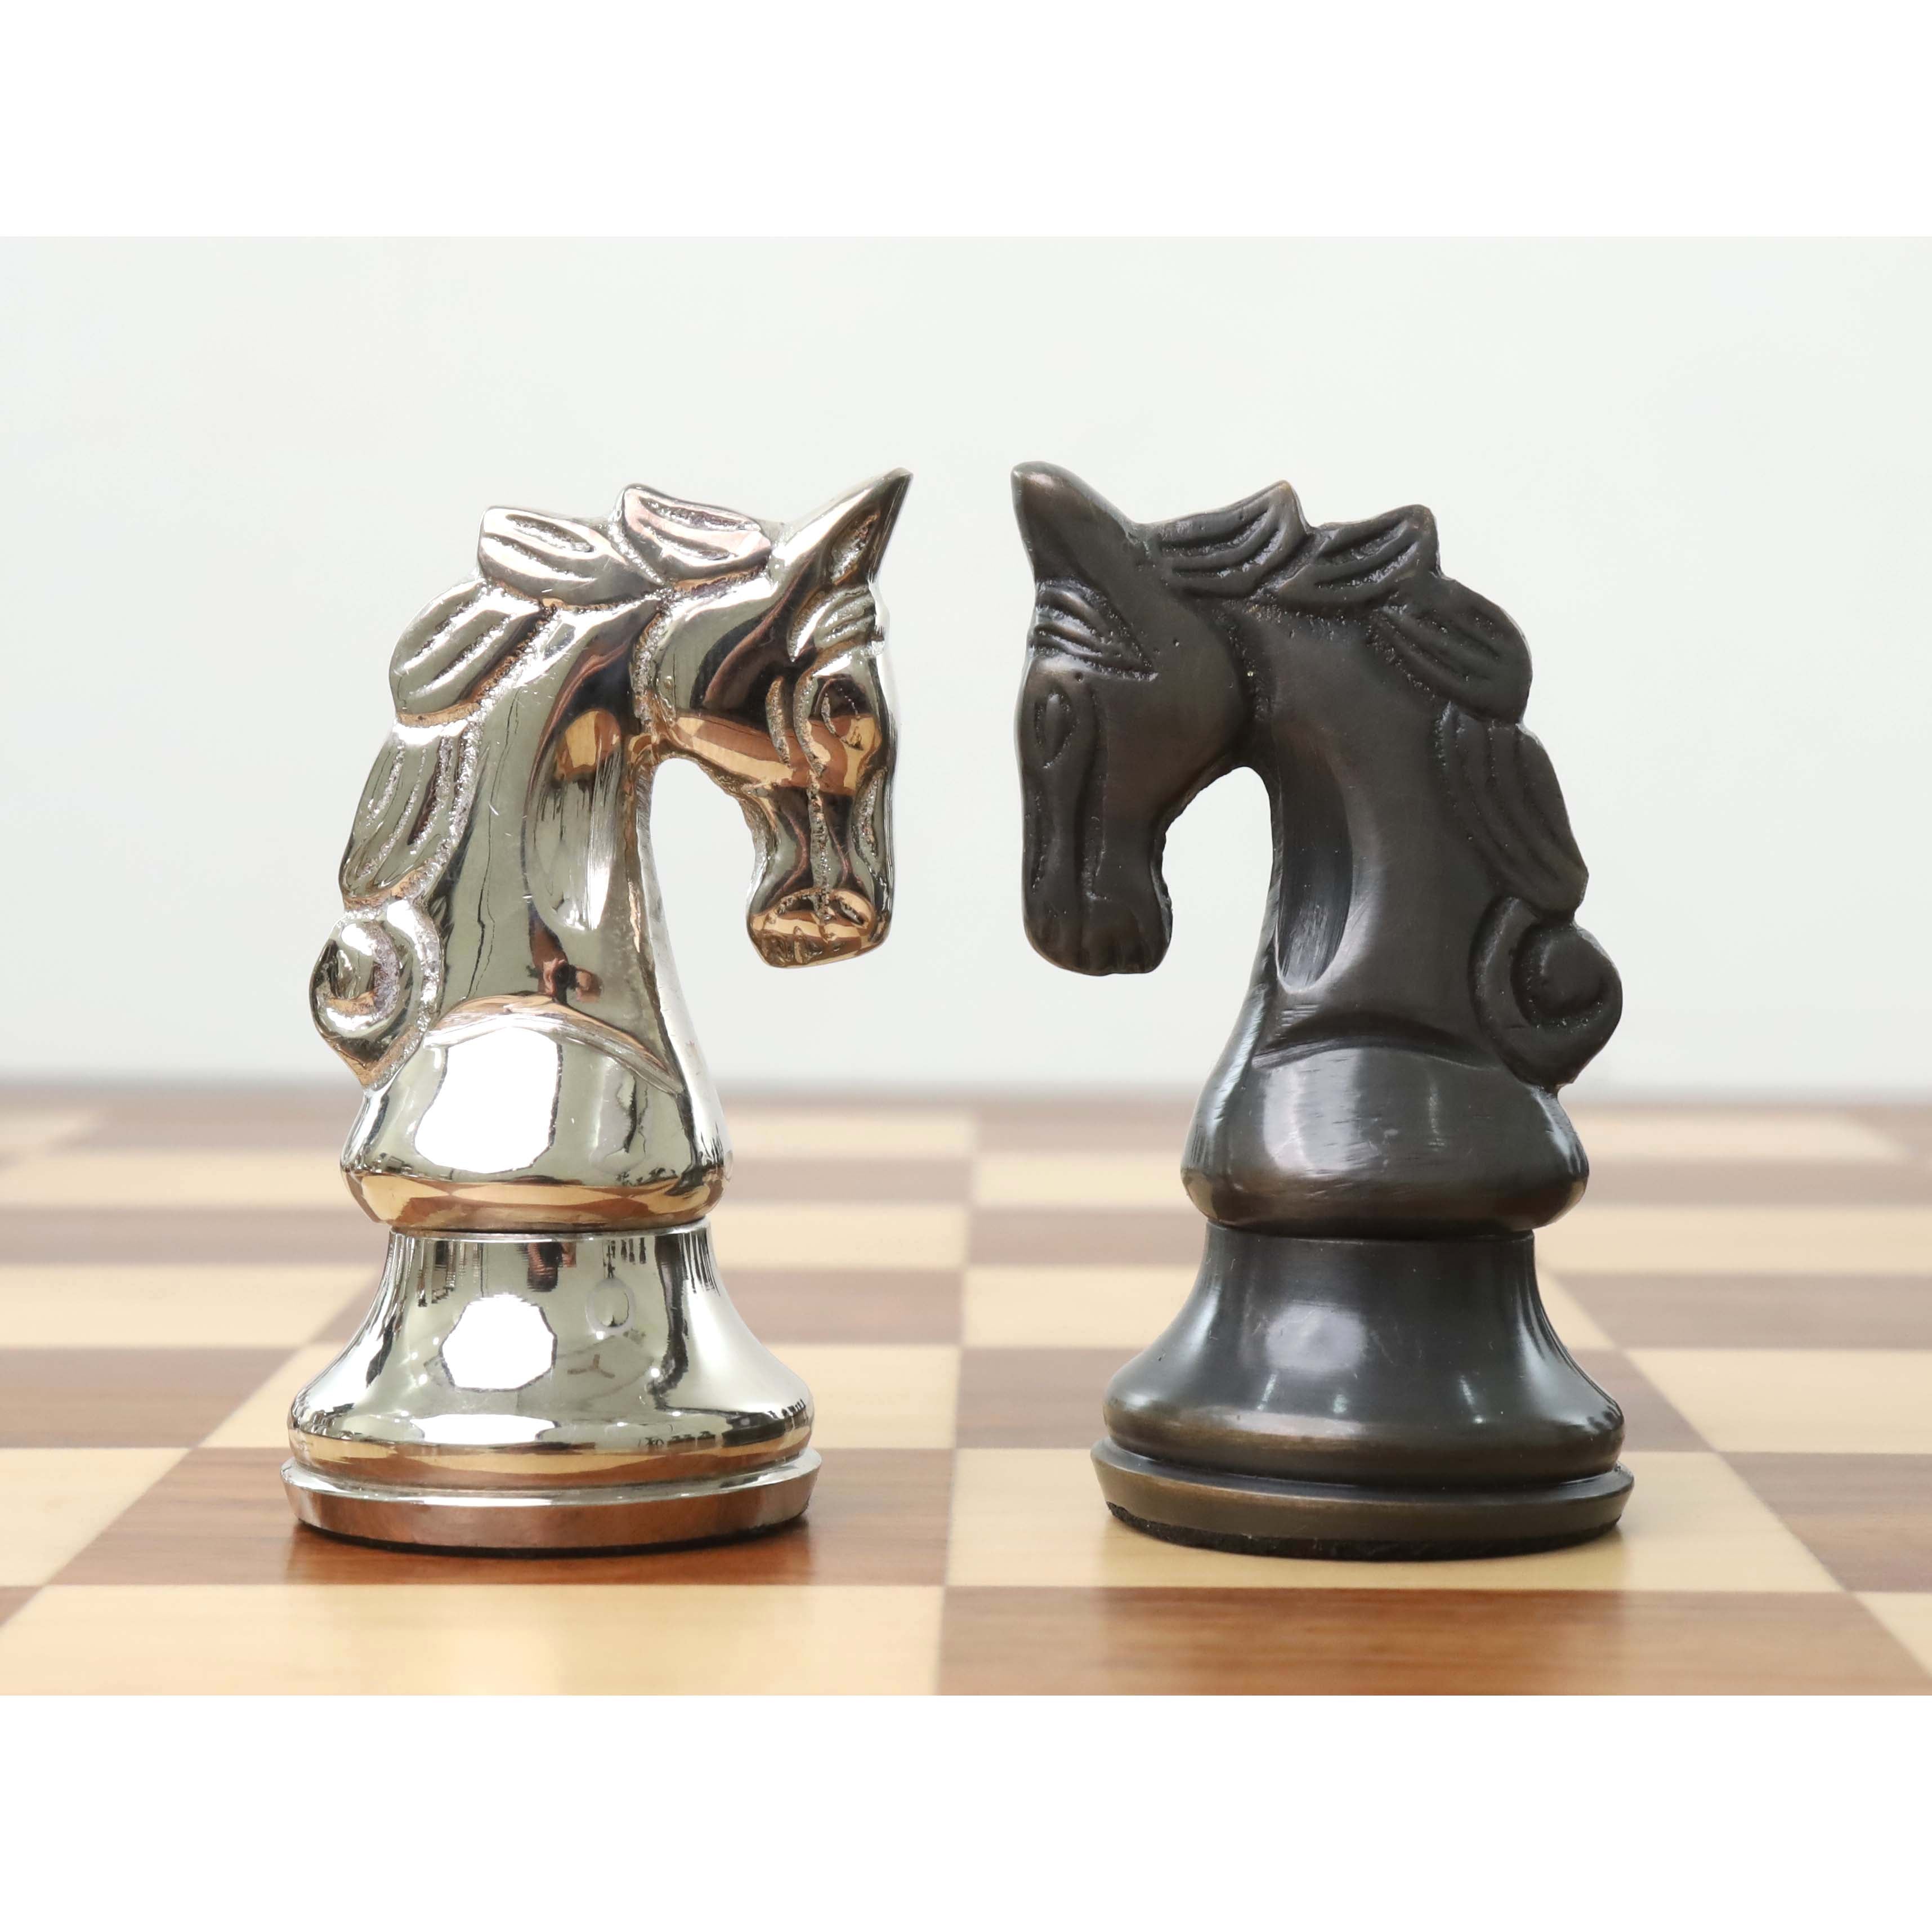 Deluxe Series Brass Metal Luxury Chess Pieces & Board Set- 15-Rosewood  border – royalchessmall